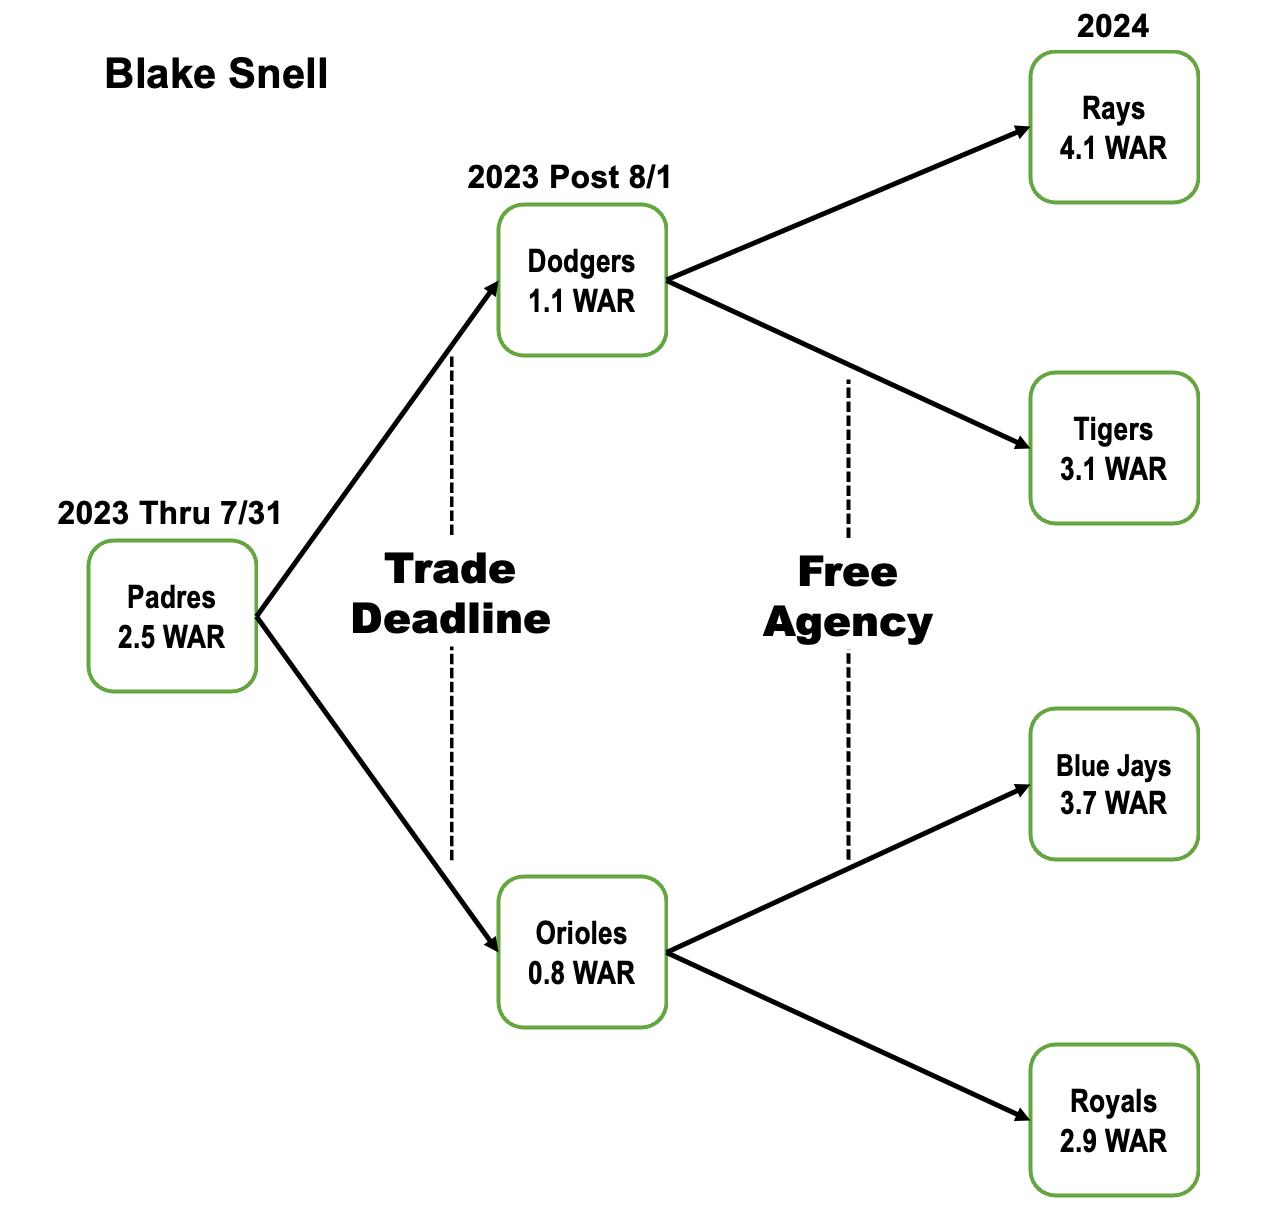 Flow chart showing performance outcomes for Blake Snell based on which team he's pitching for